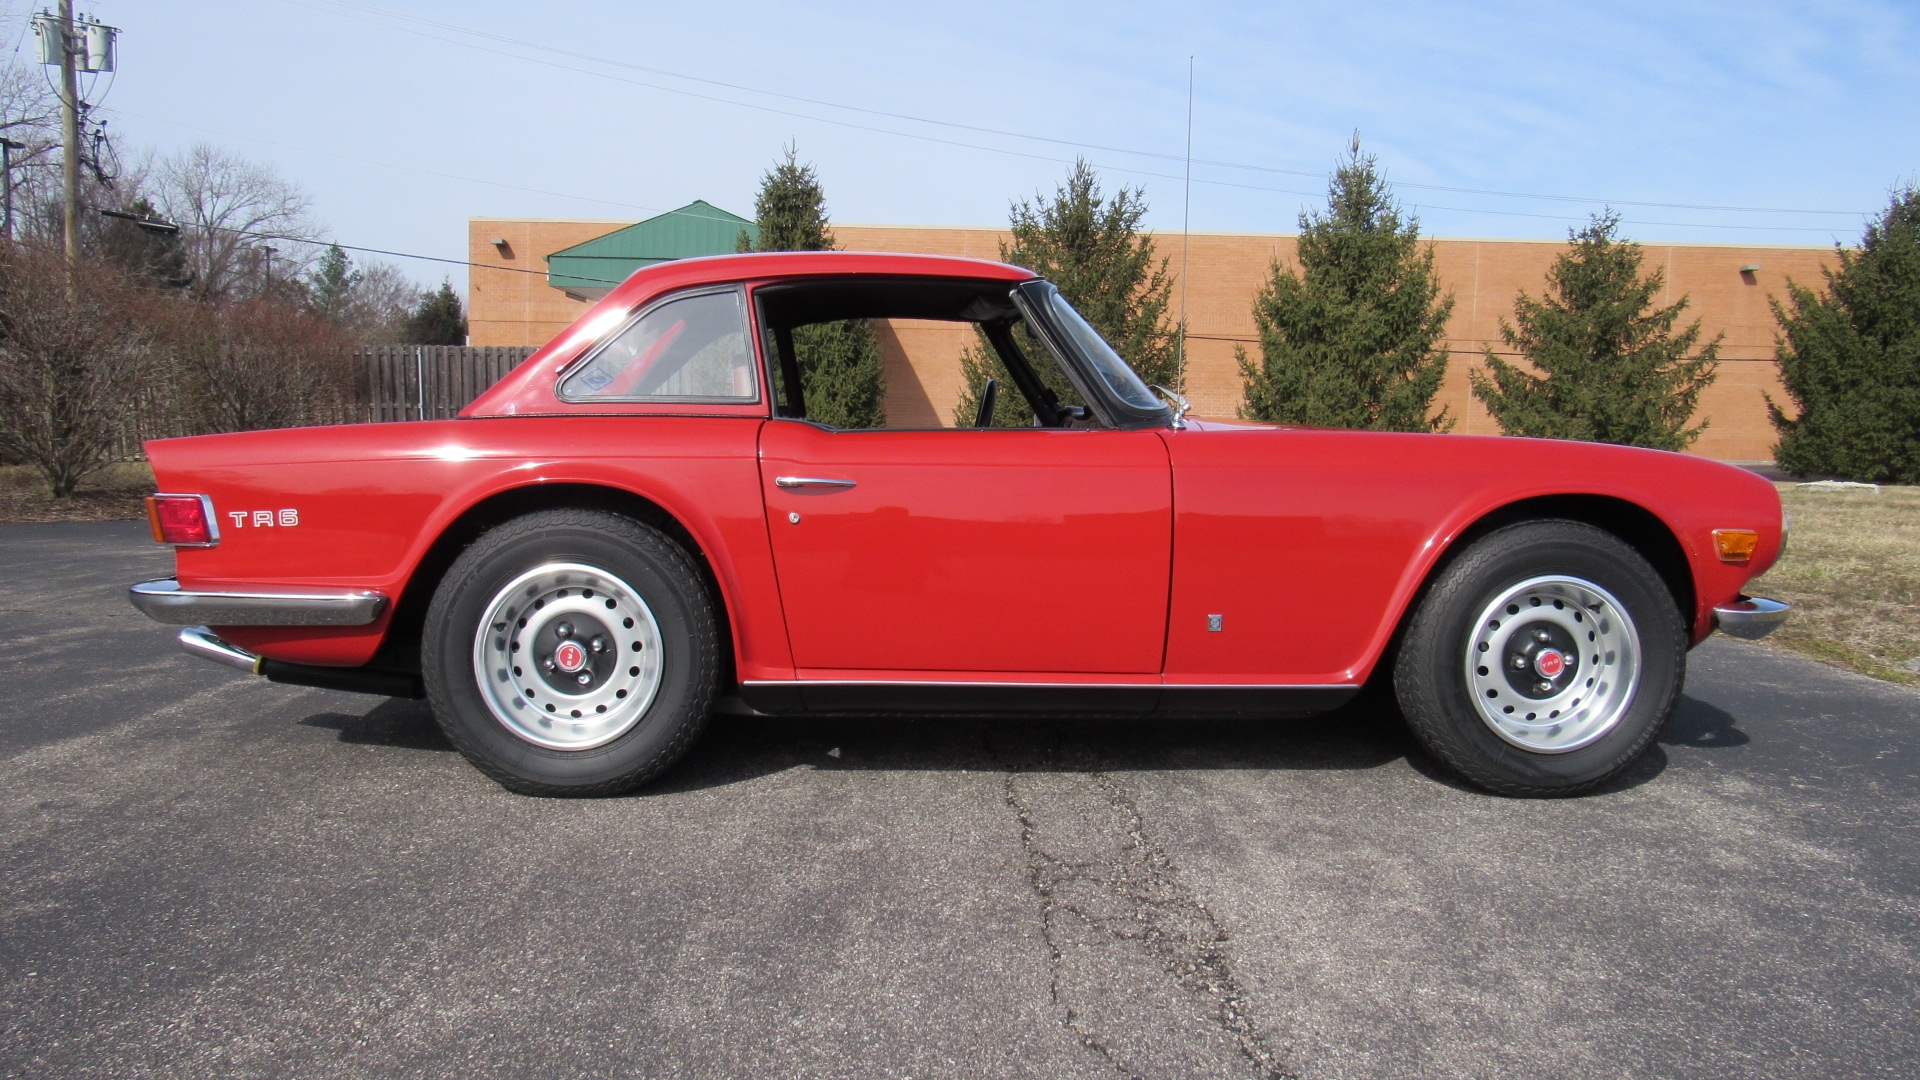 1972 TR6, Factory Overdrive, Hardtop, SOLD!